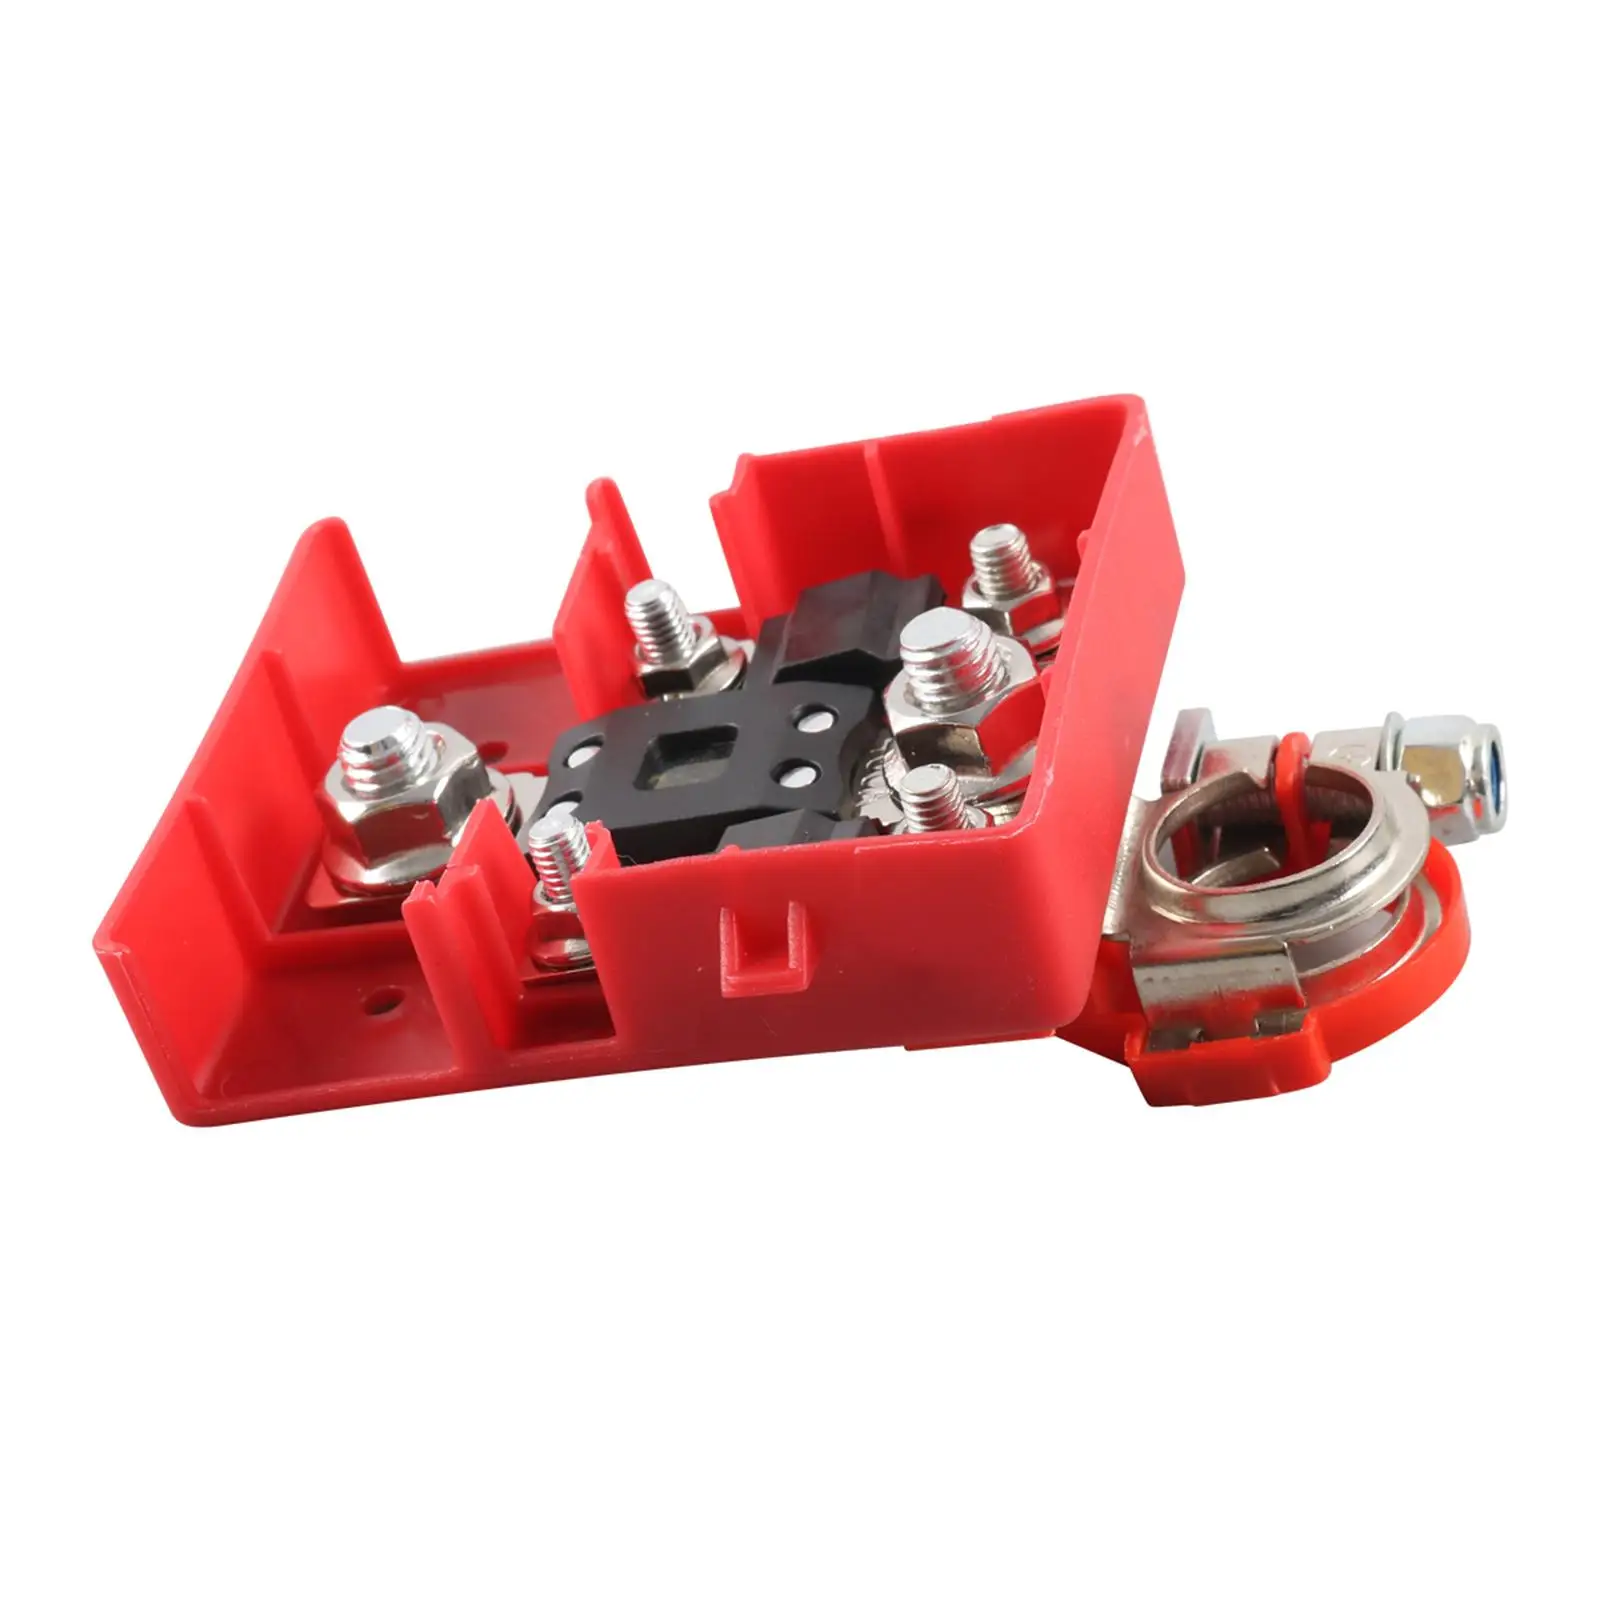 Fused Battery Distribution Terminals Clamp Connector 32V 400A Quick Release Fit for Motorcycle Car Vehicle Bus